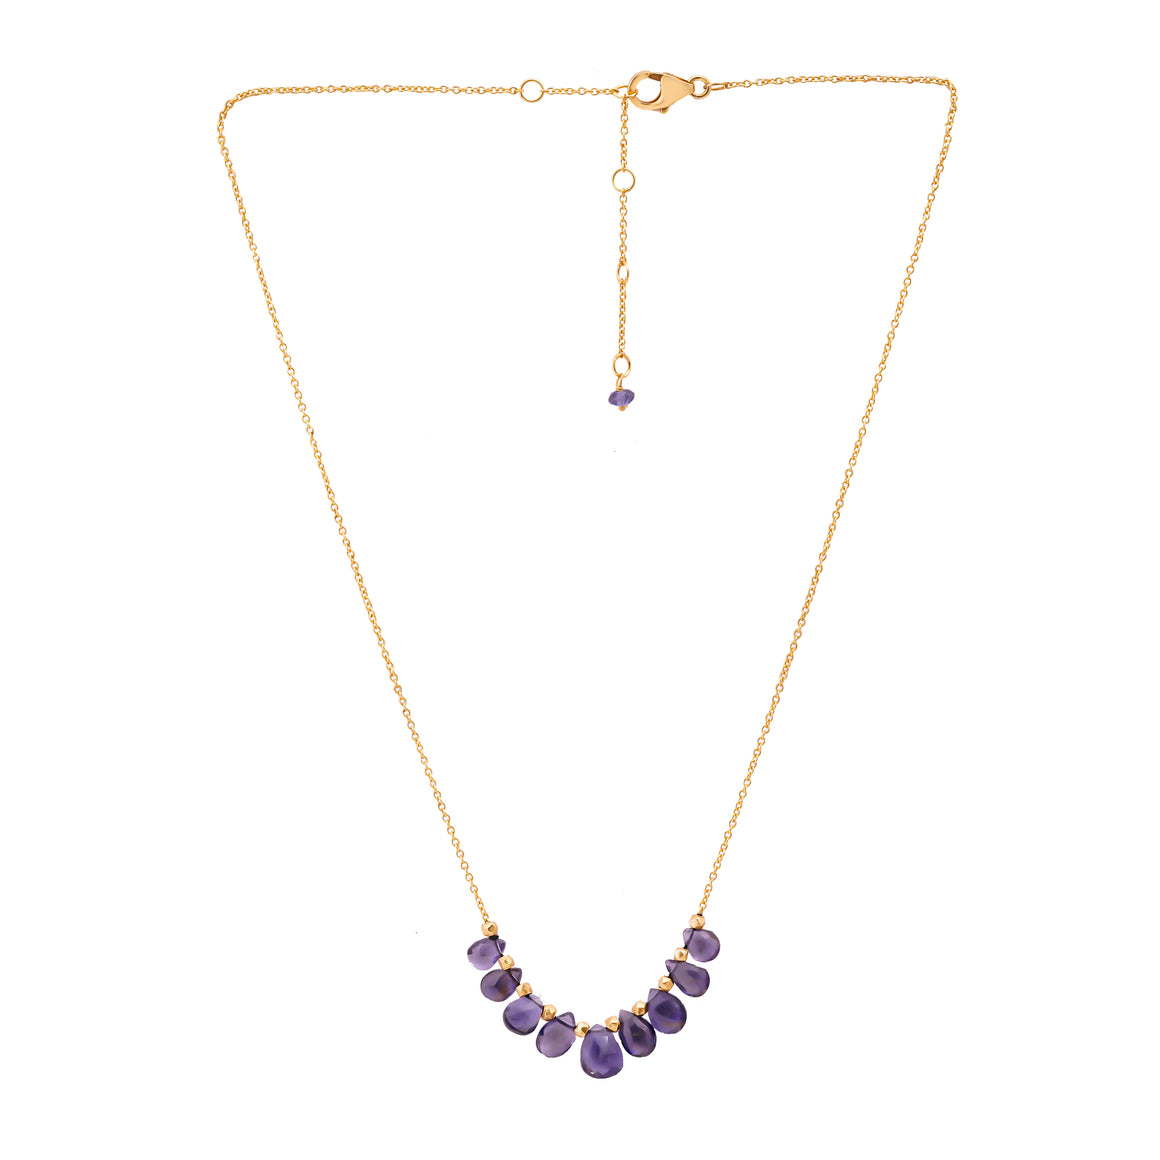 Iolite Drops with Gold Beads on Adjustable Chain